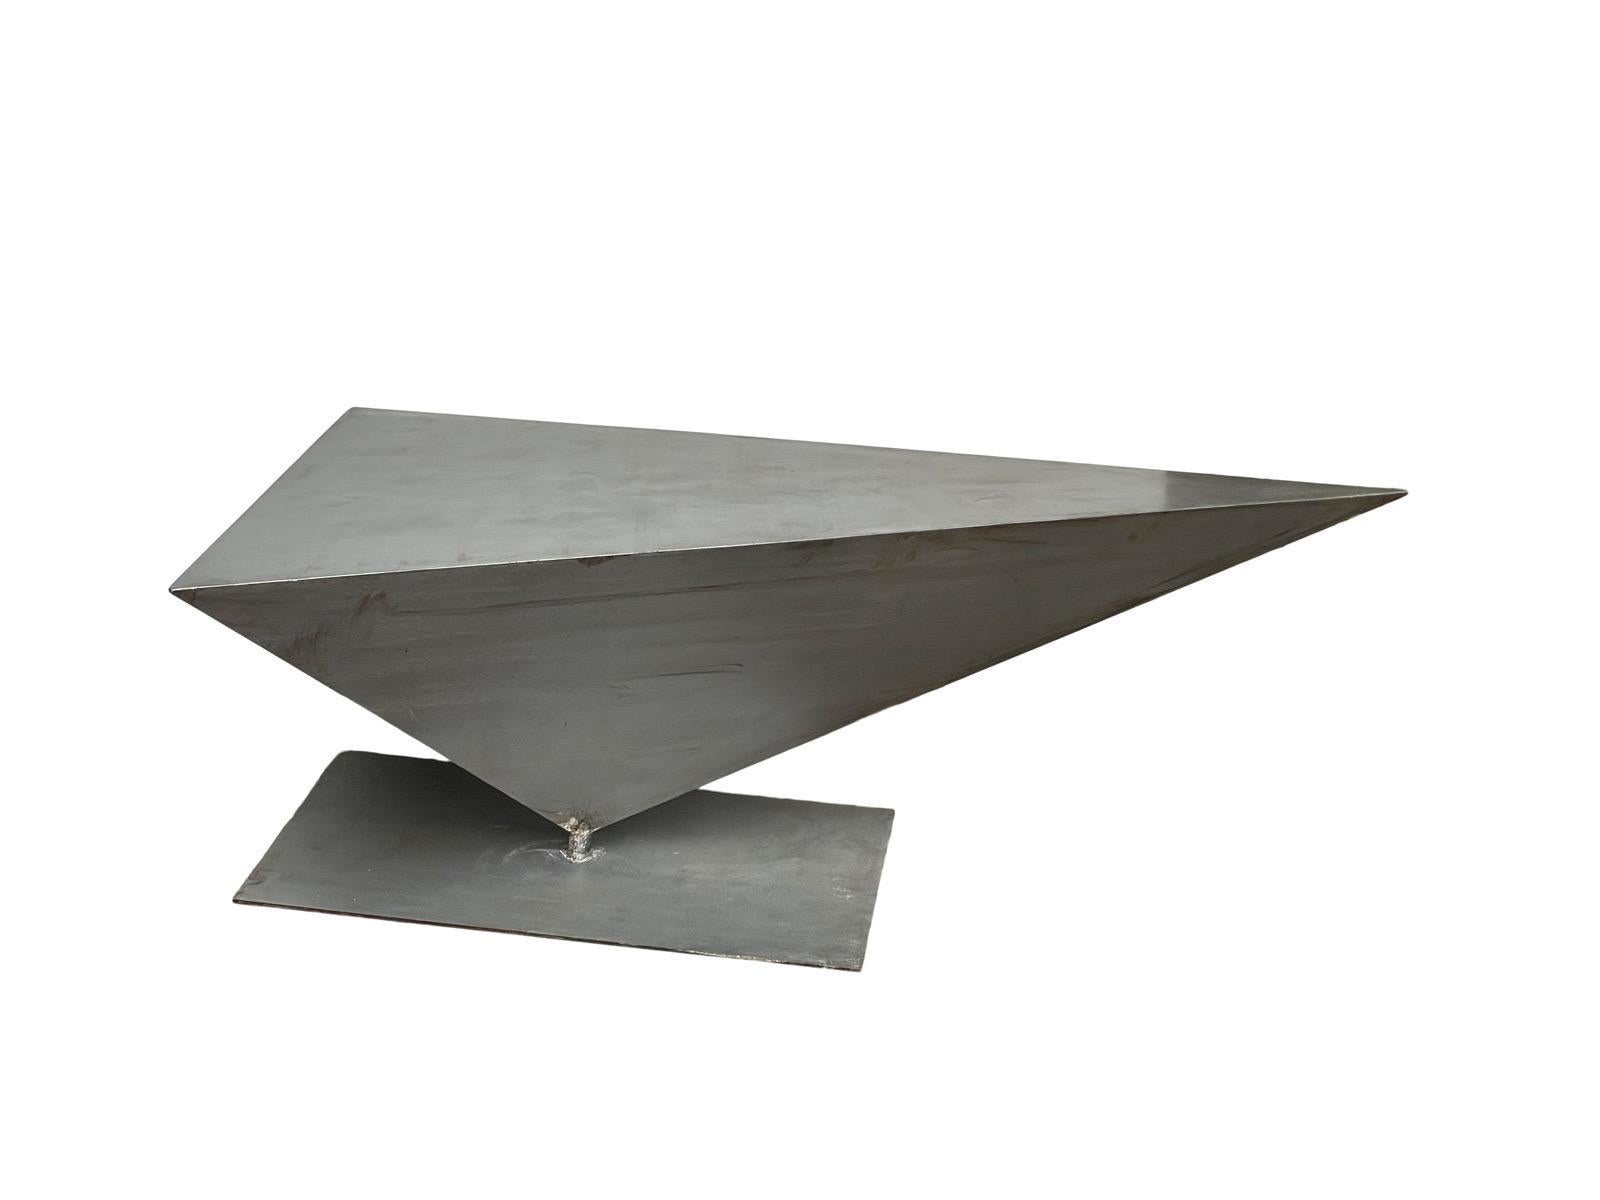 American 1980s Angular Steel Sculptured Coffee Table For Sale